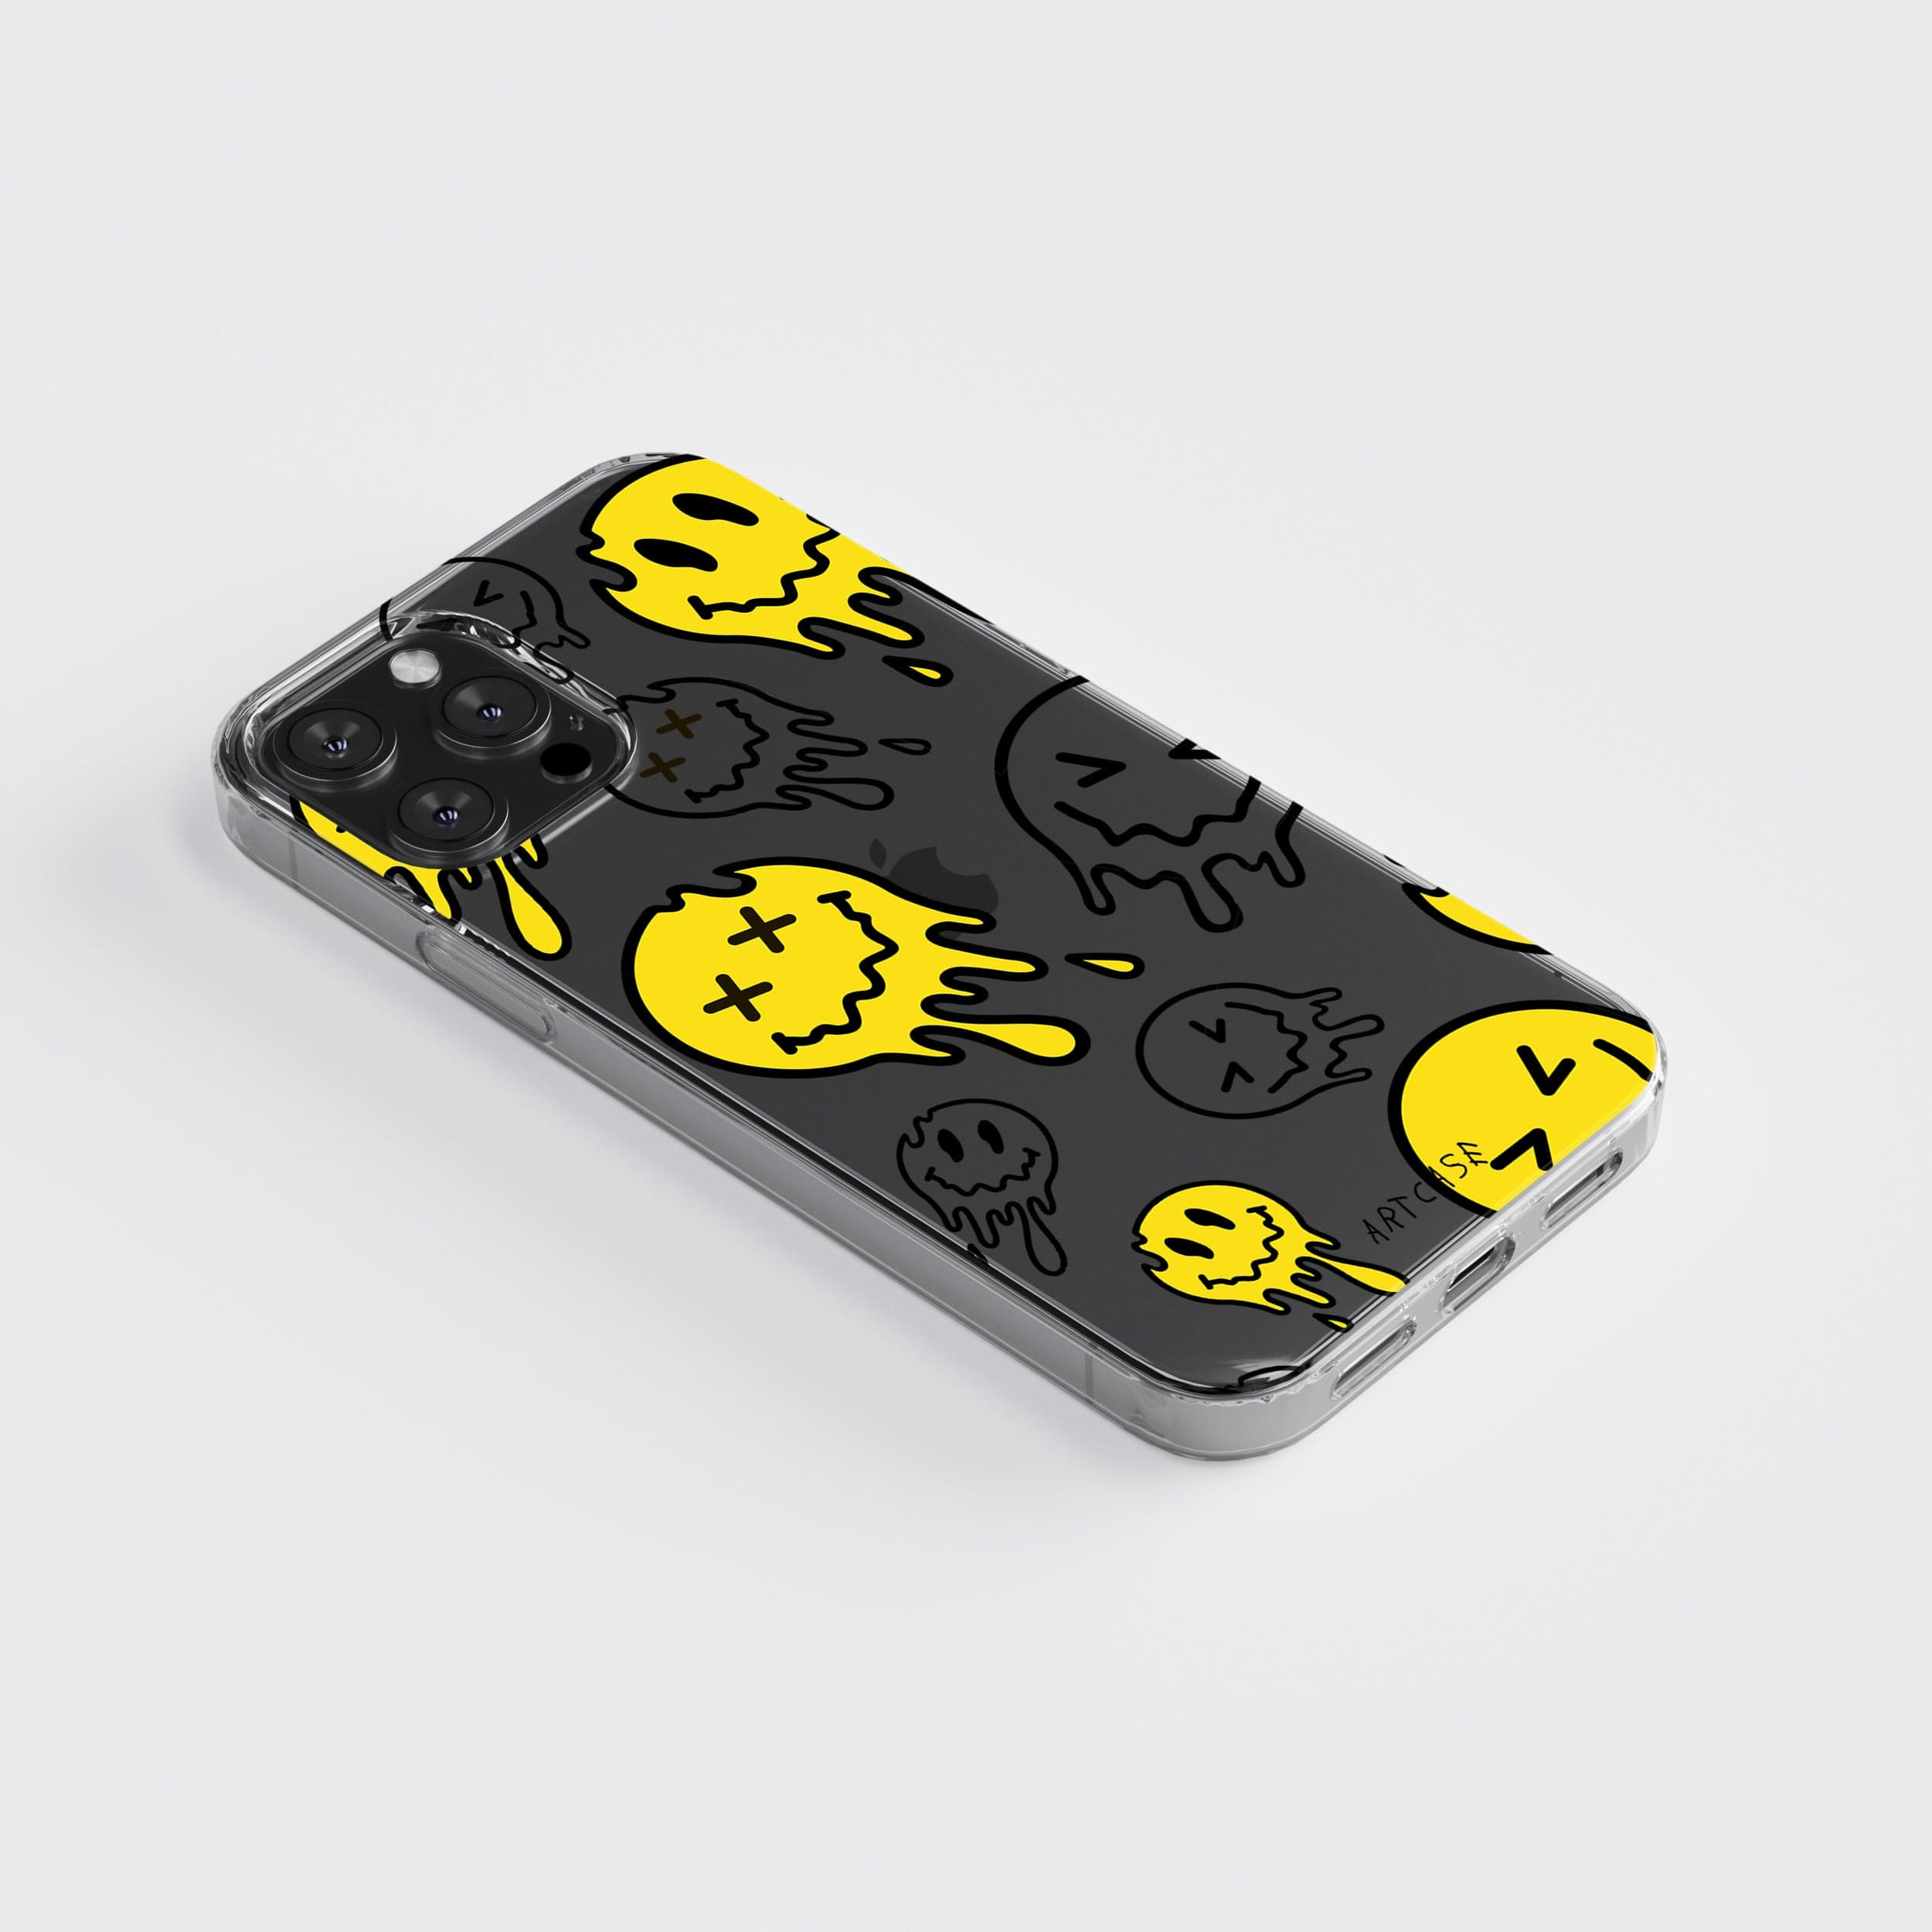 Transparent silicone case "Scarry smiles"